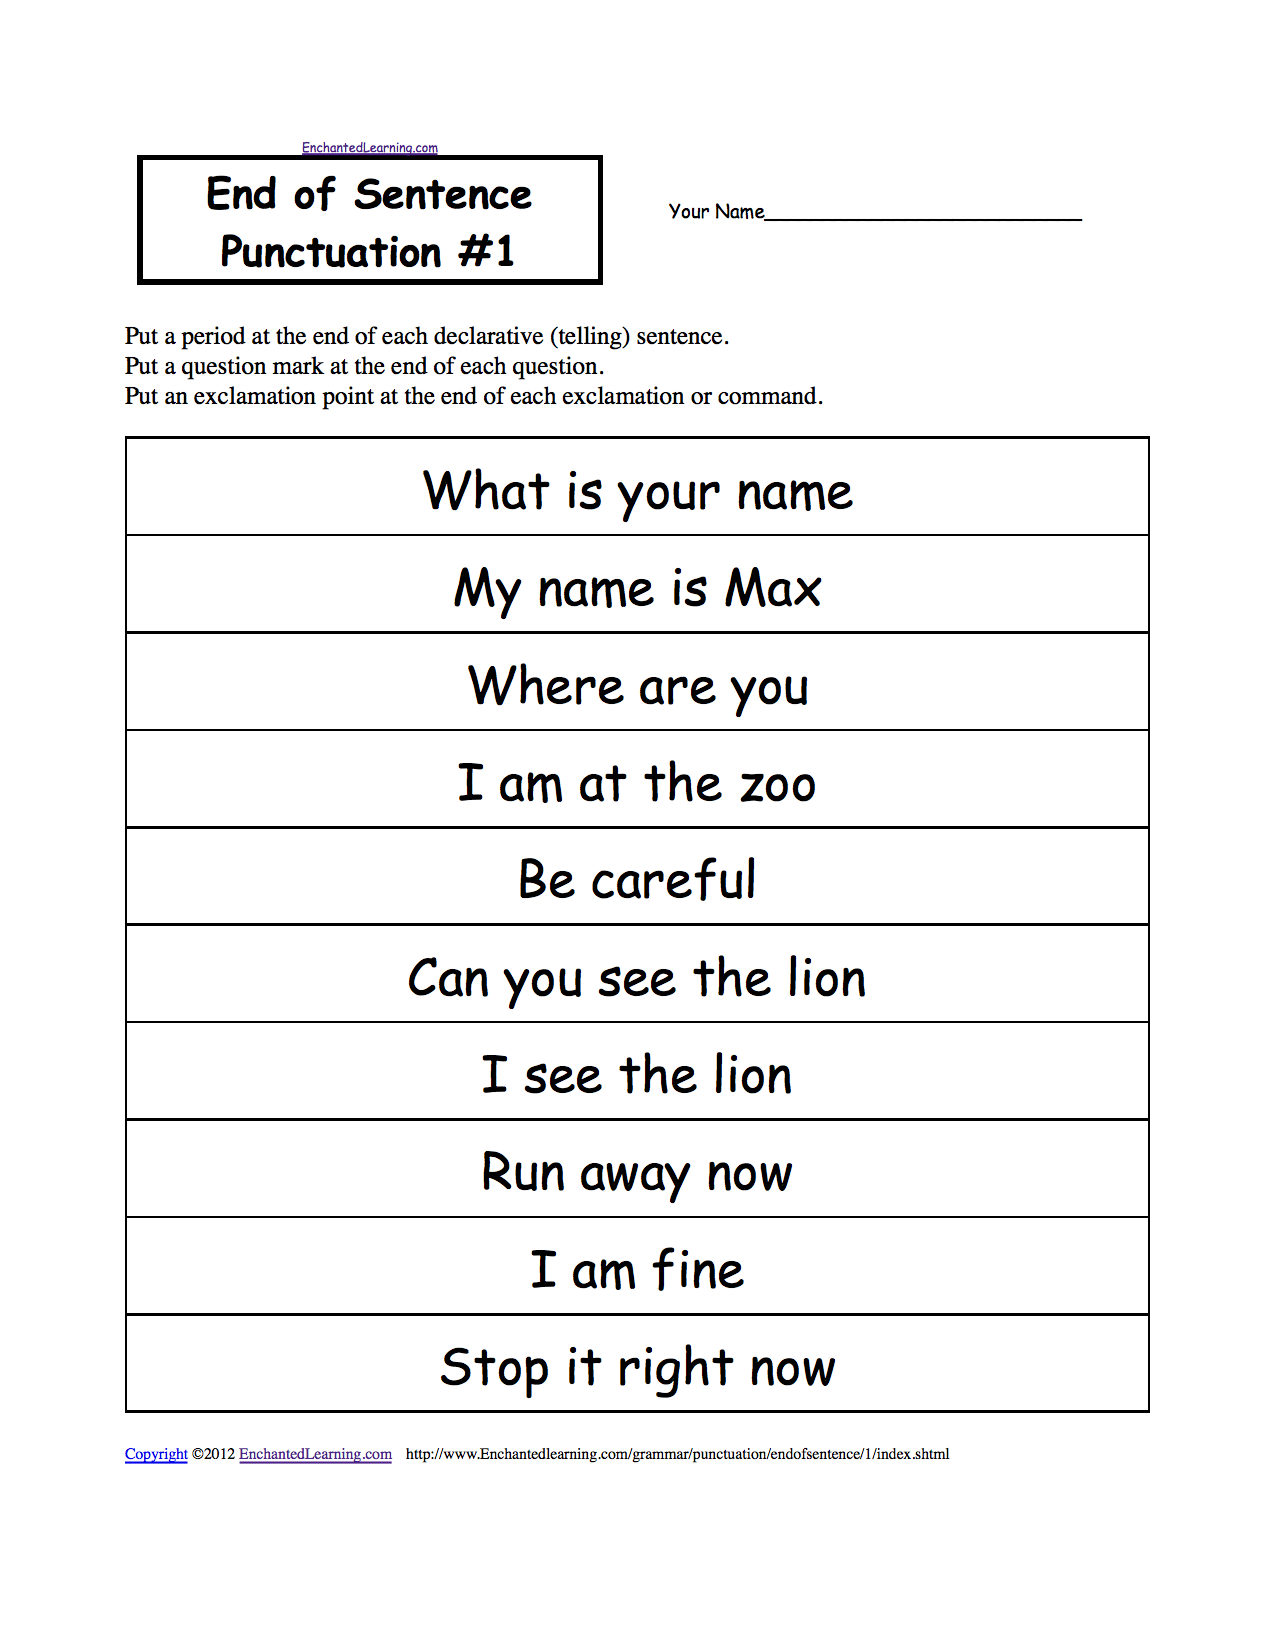 Capitalization And Punctuation Worksheet PdfCapitalization And Punctuation Worksheet Pdf